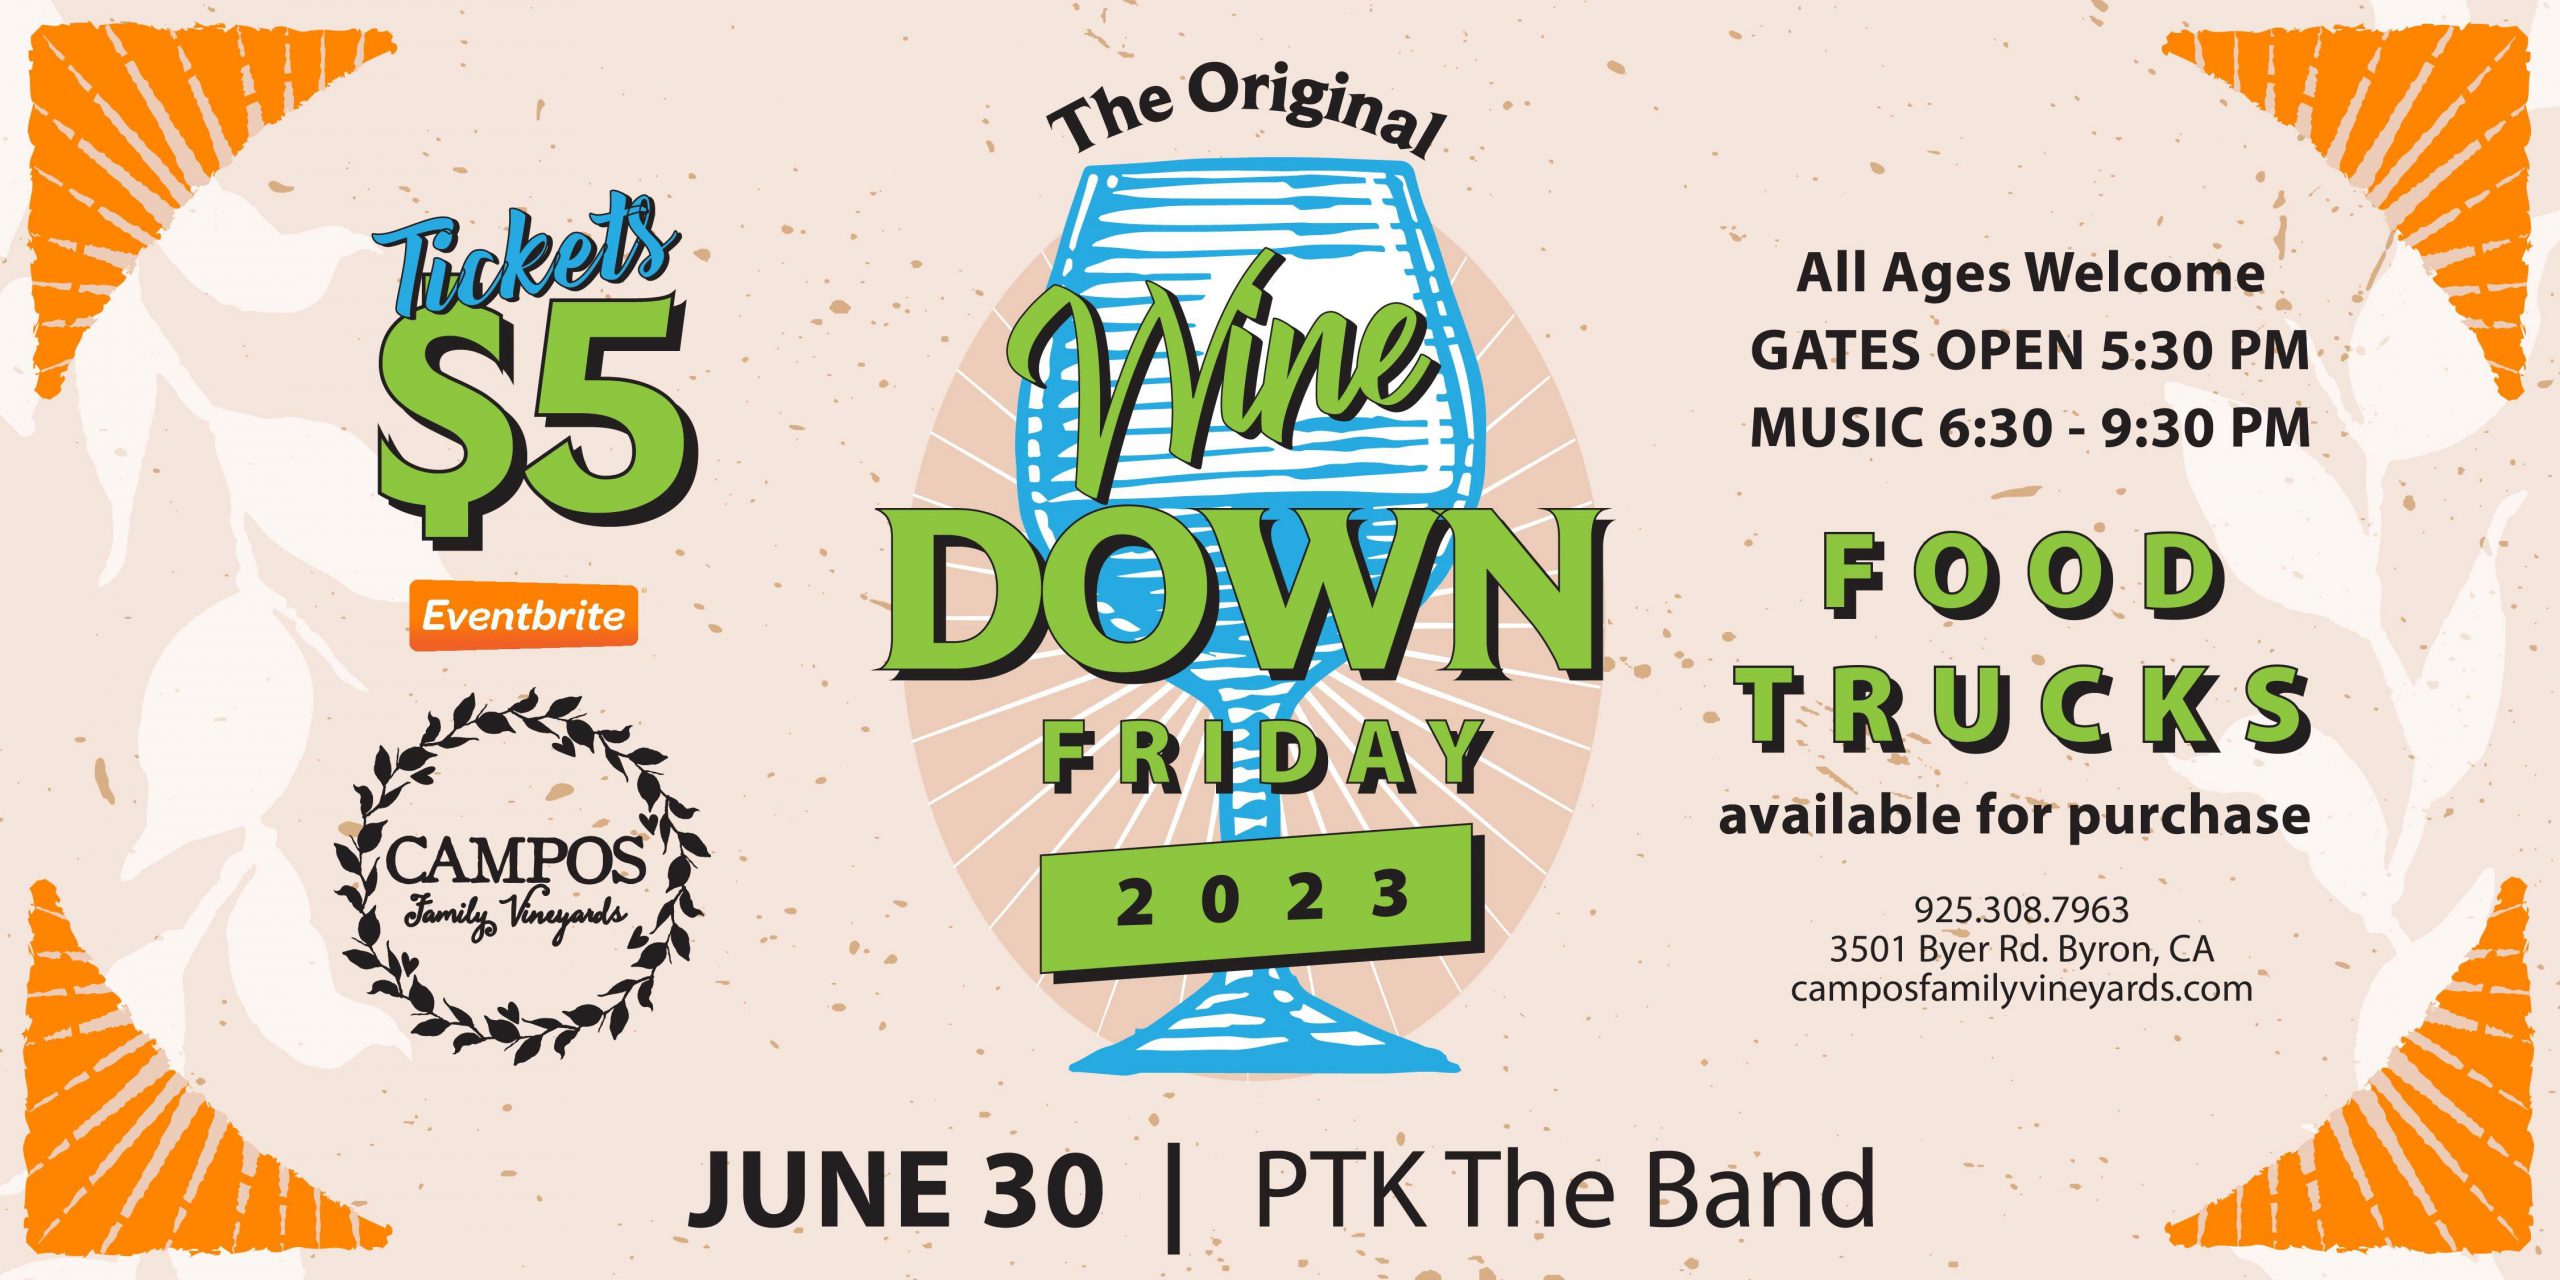 The Original Wine Down Friday - PTK The Band!